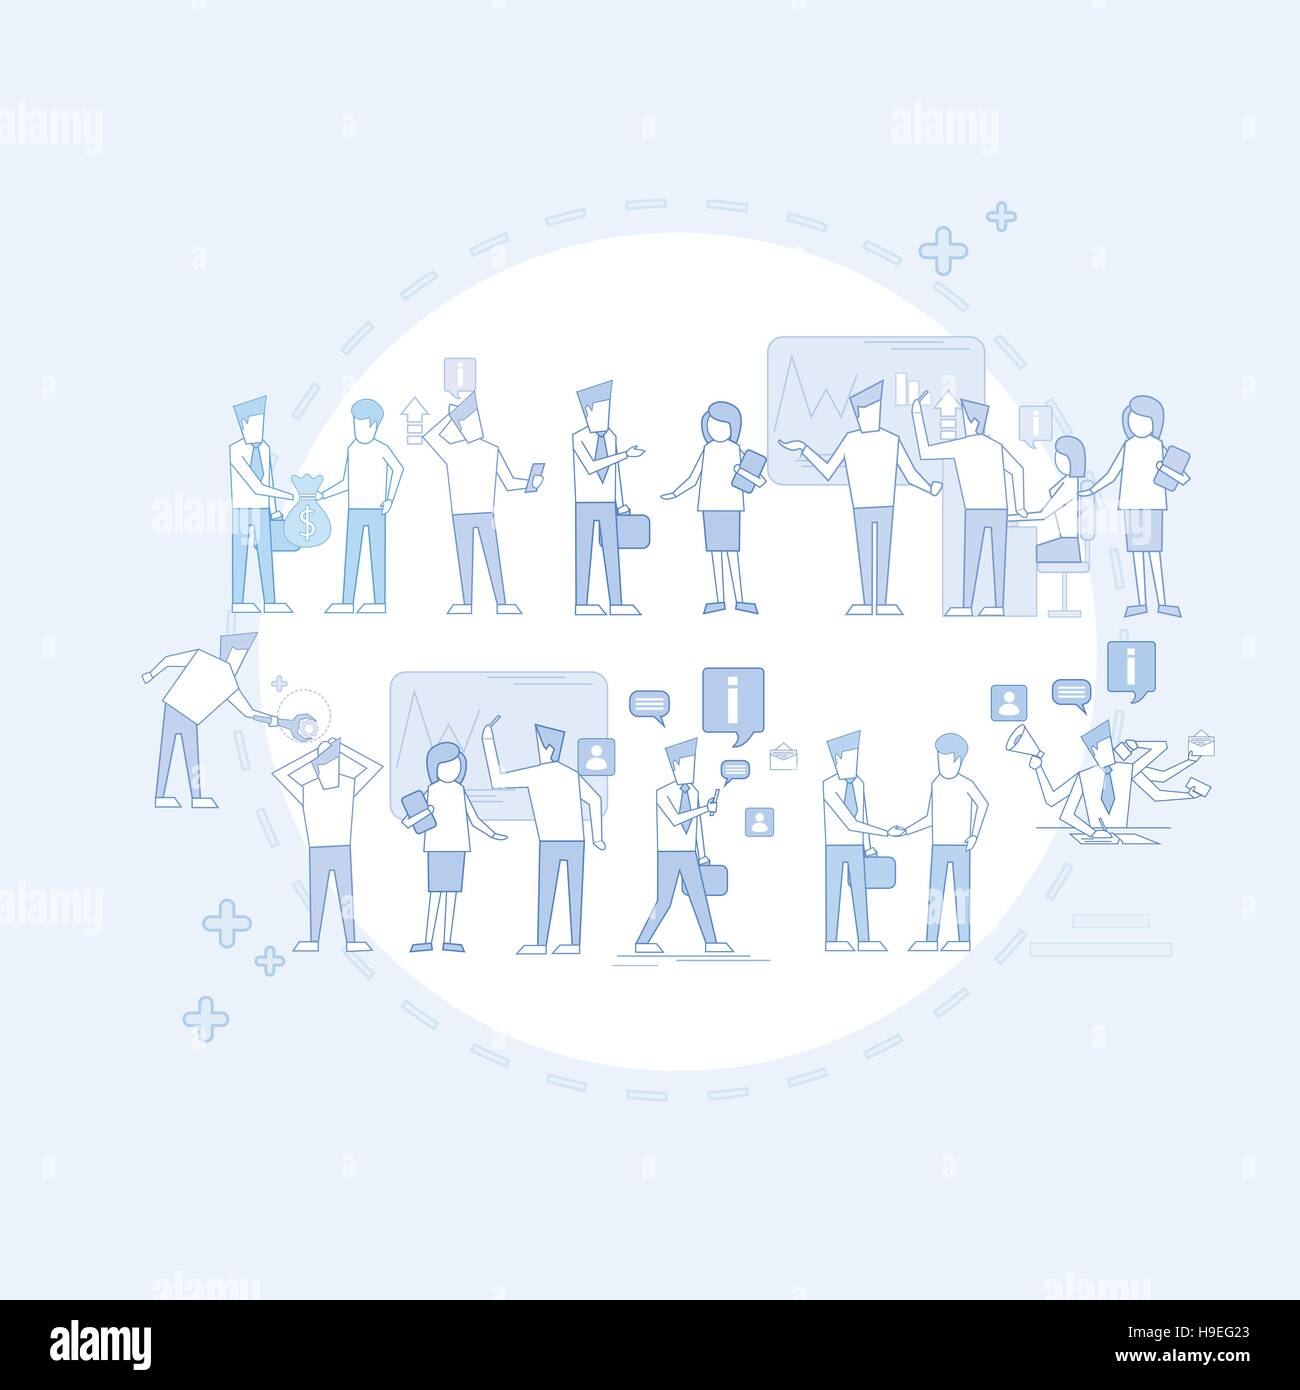 Business People Group Team Businesspeople Teamwork Conference Brainstorming Meeting Stock Vector